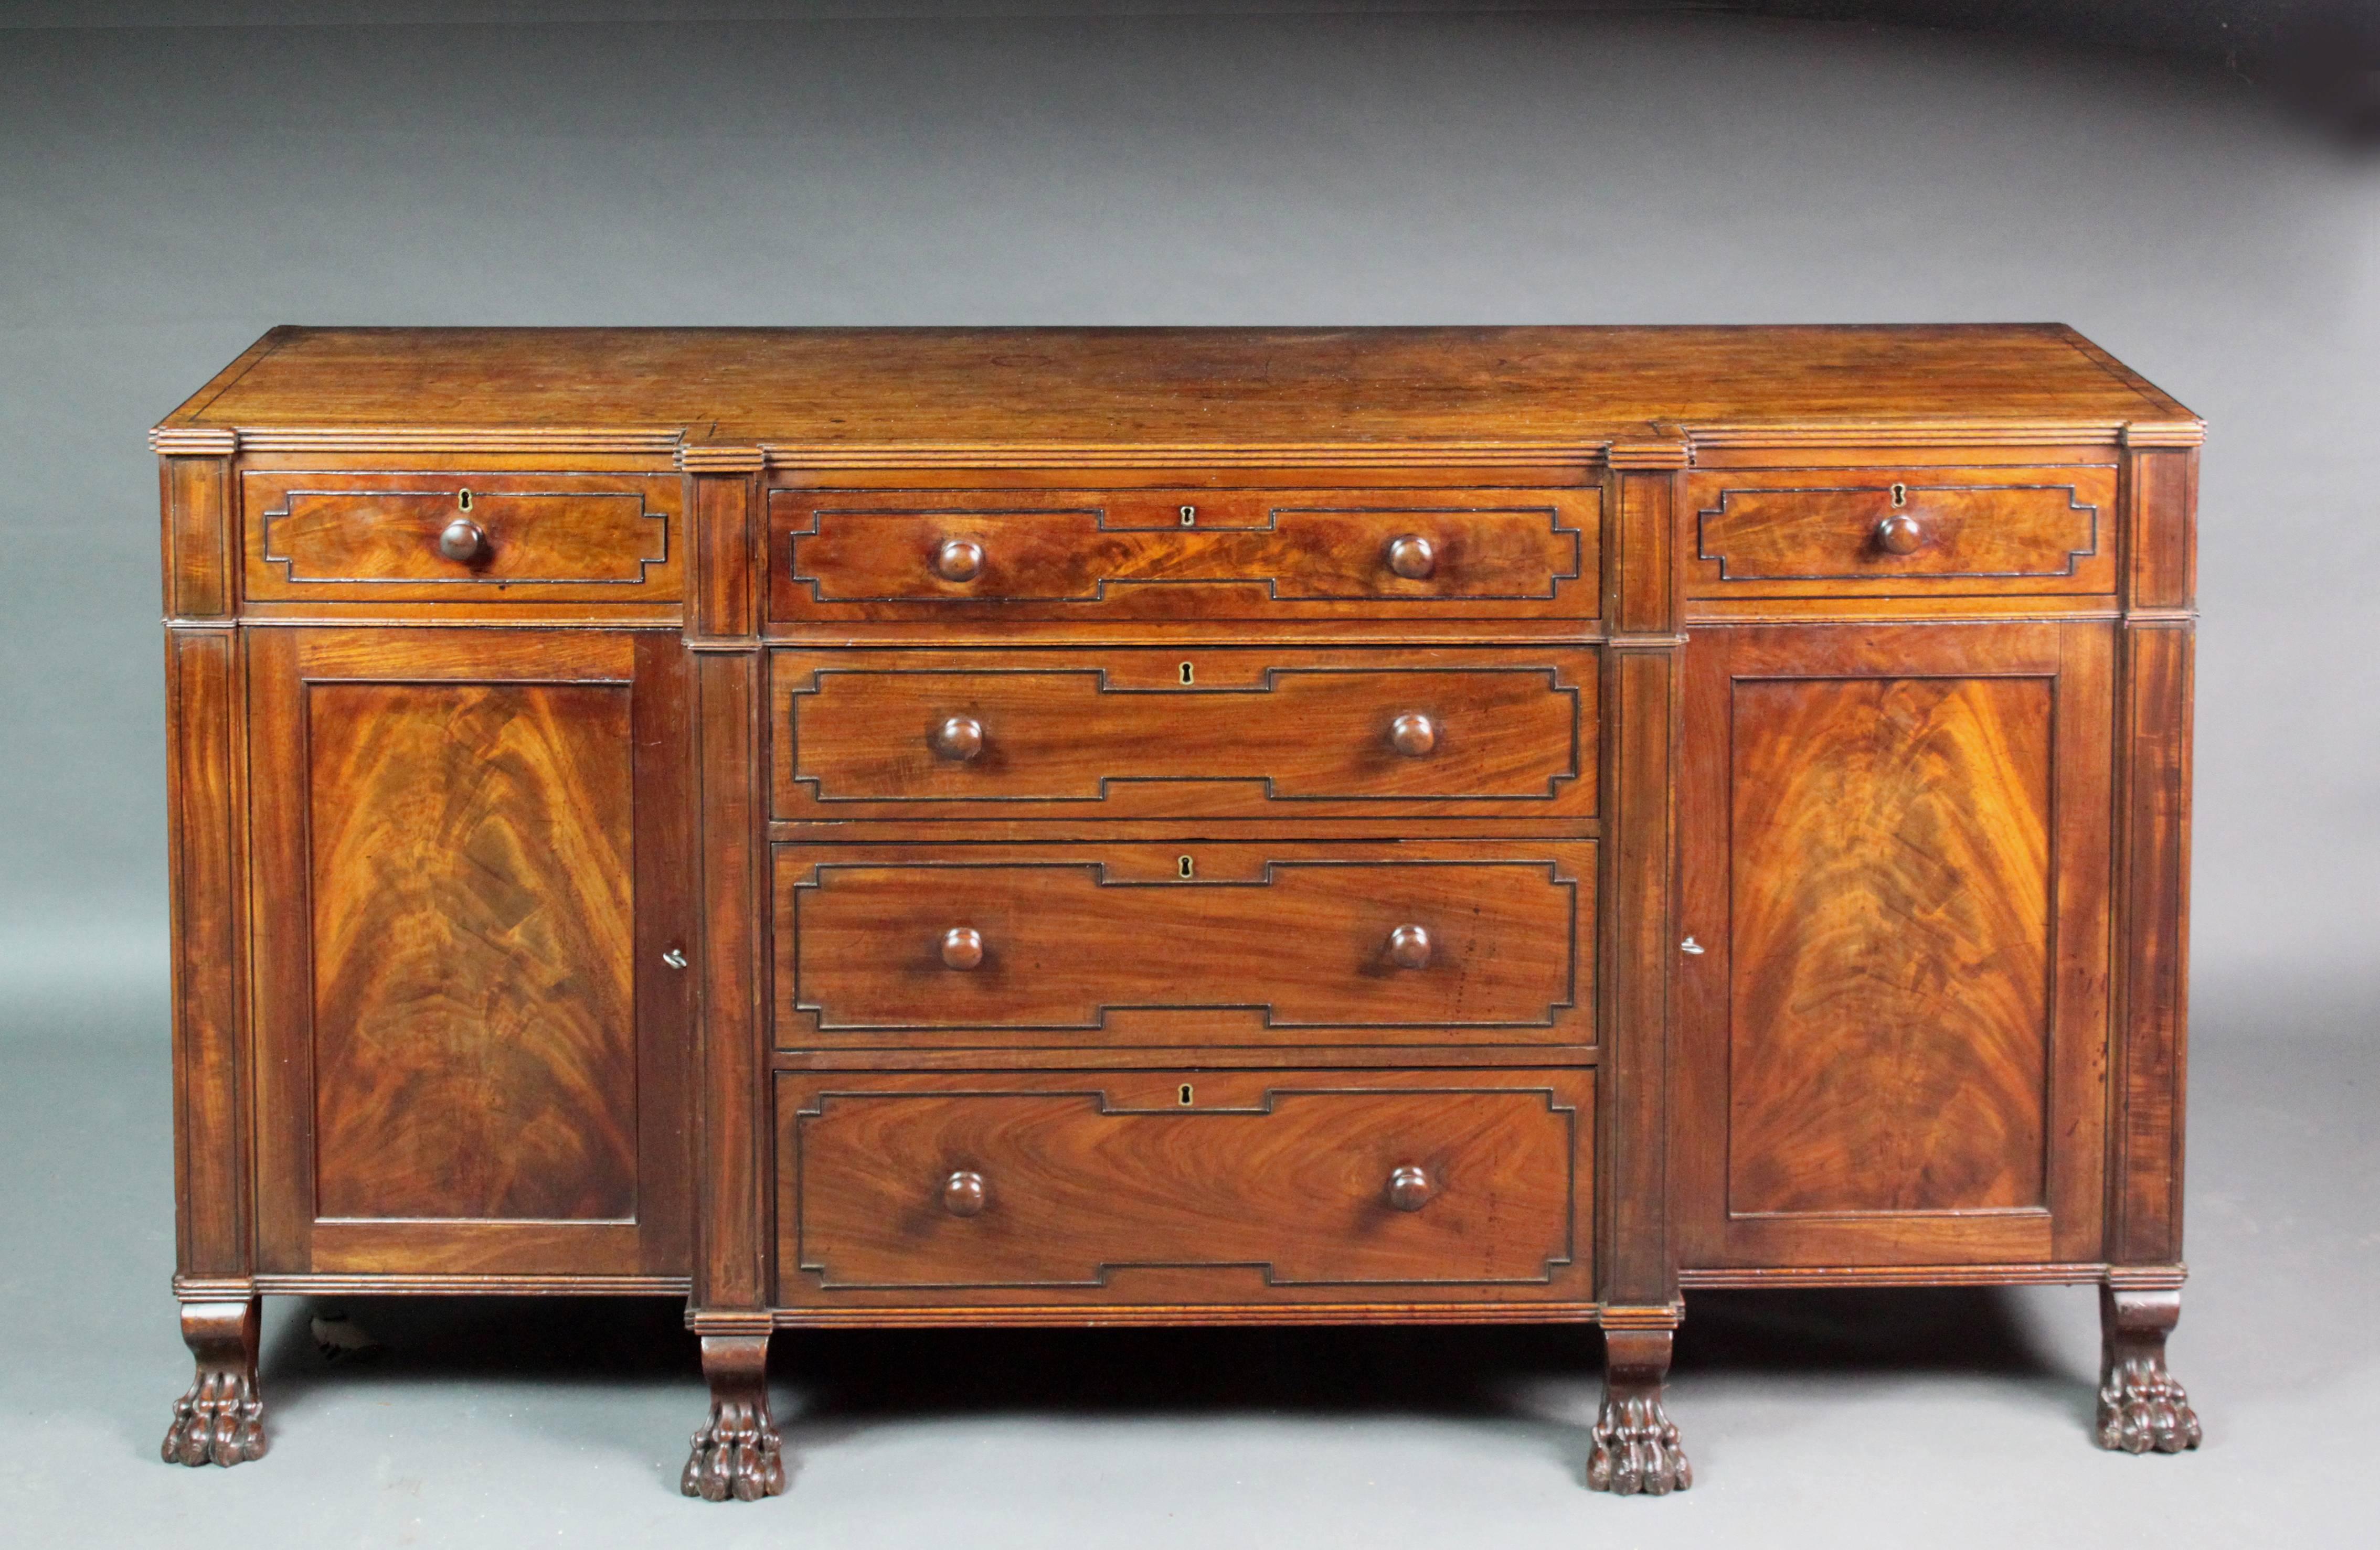 A George III break-front side cabinet in figured mahogany with ebony stringing and well-carved paw-feet; mahogany drawer sides with cedar wood bottoms. See photo of patch in top which is barely visible. Good color and patina.